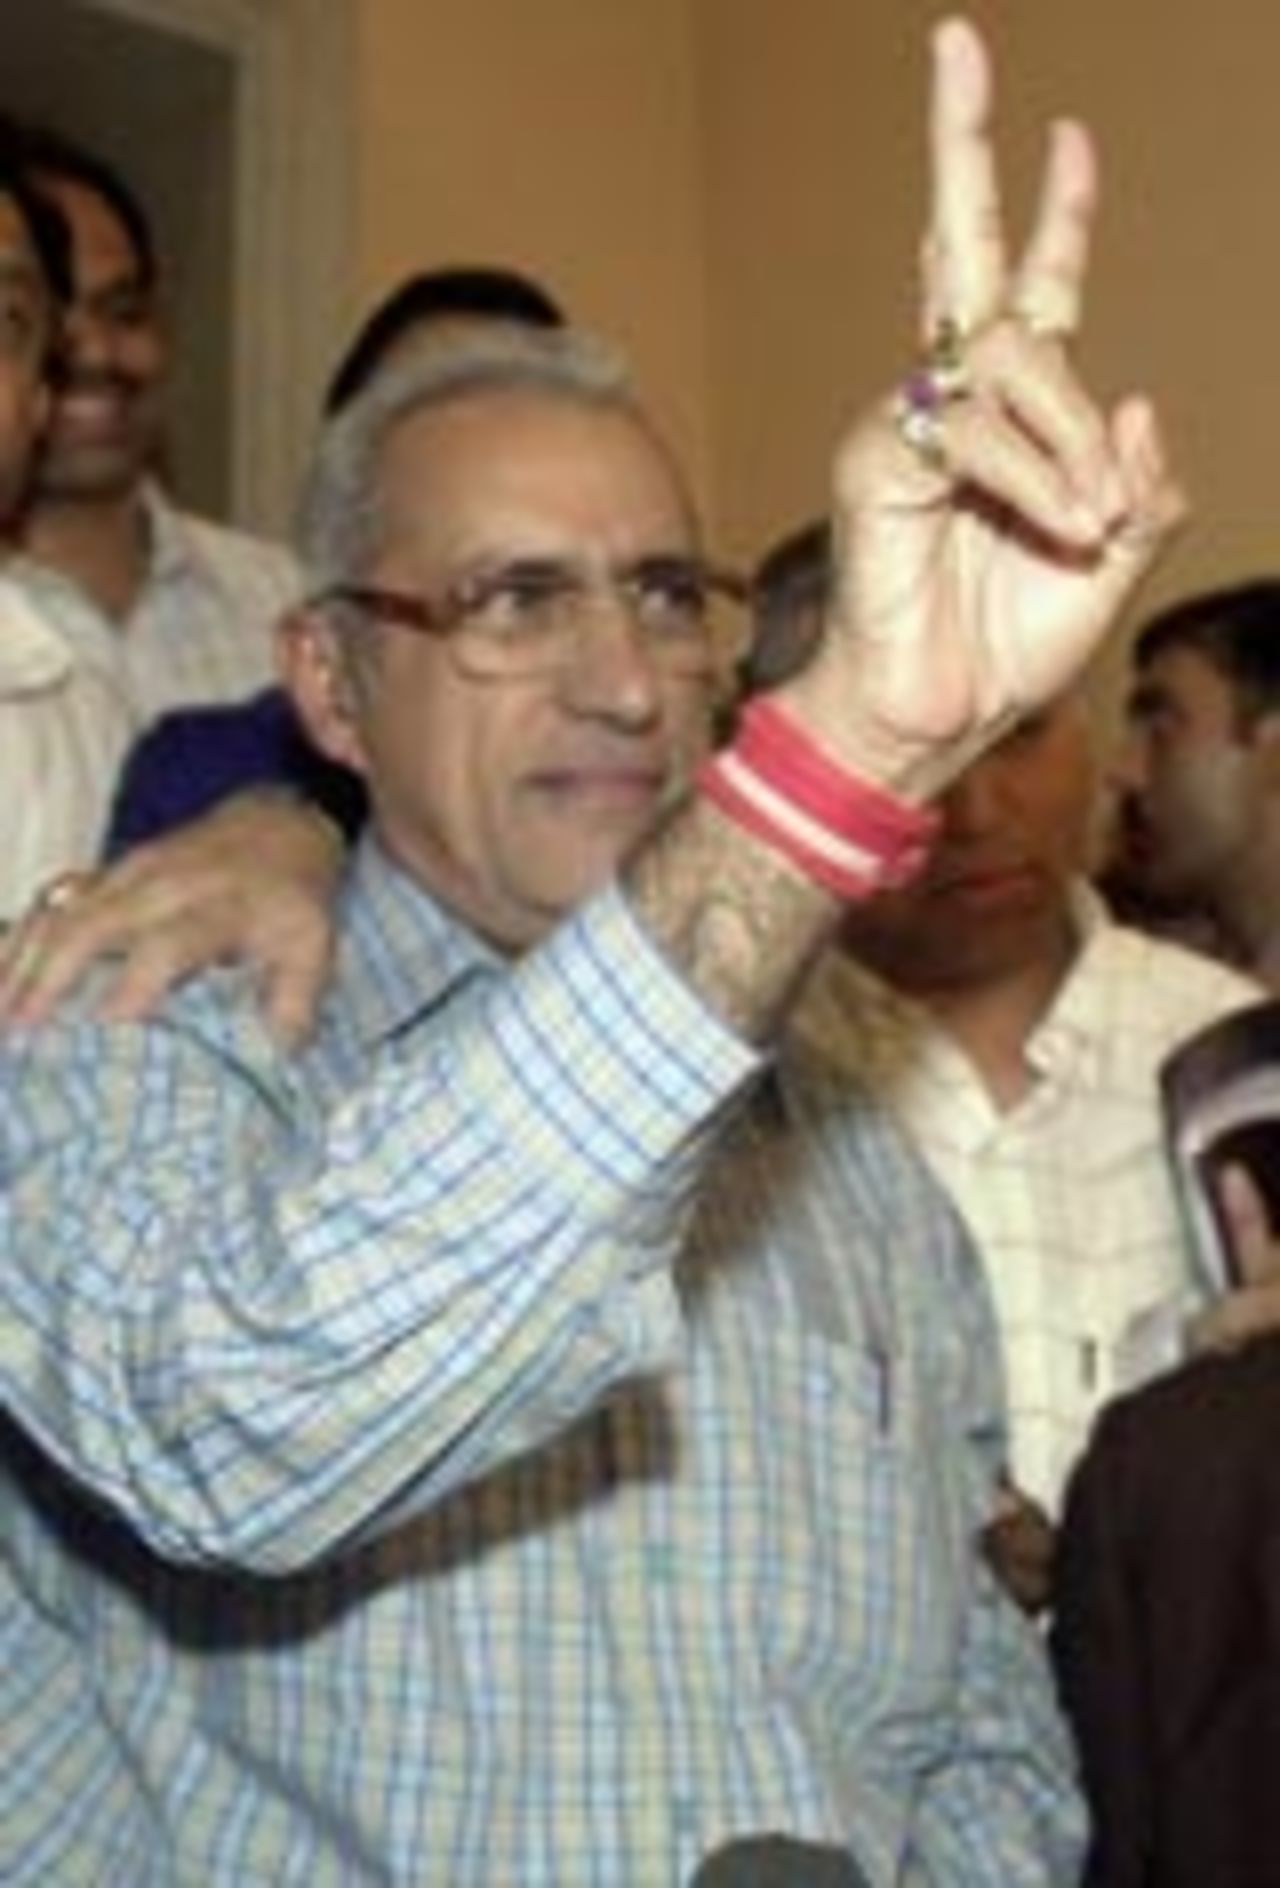 Ranbir Singh Mahendra, the BCCI's new president, showing the victory sign, September 29, 2004